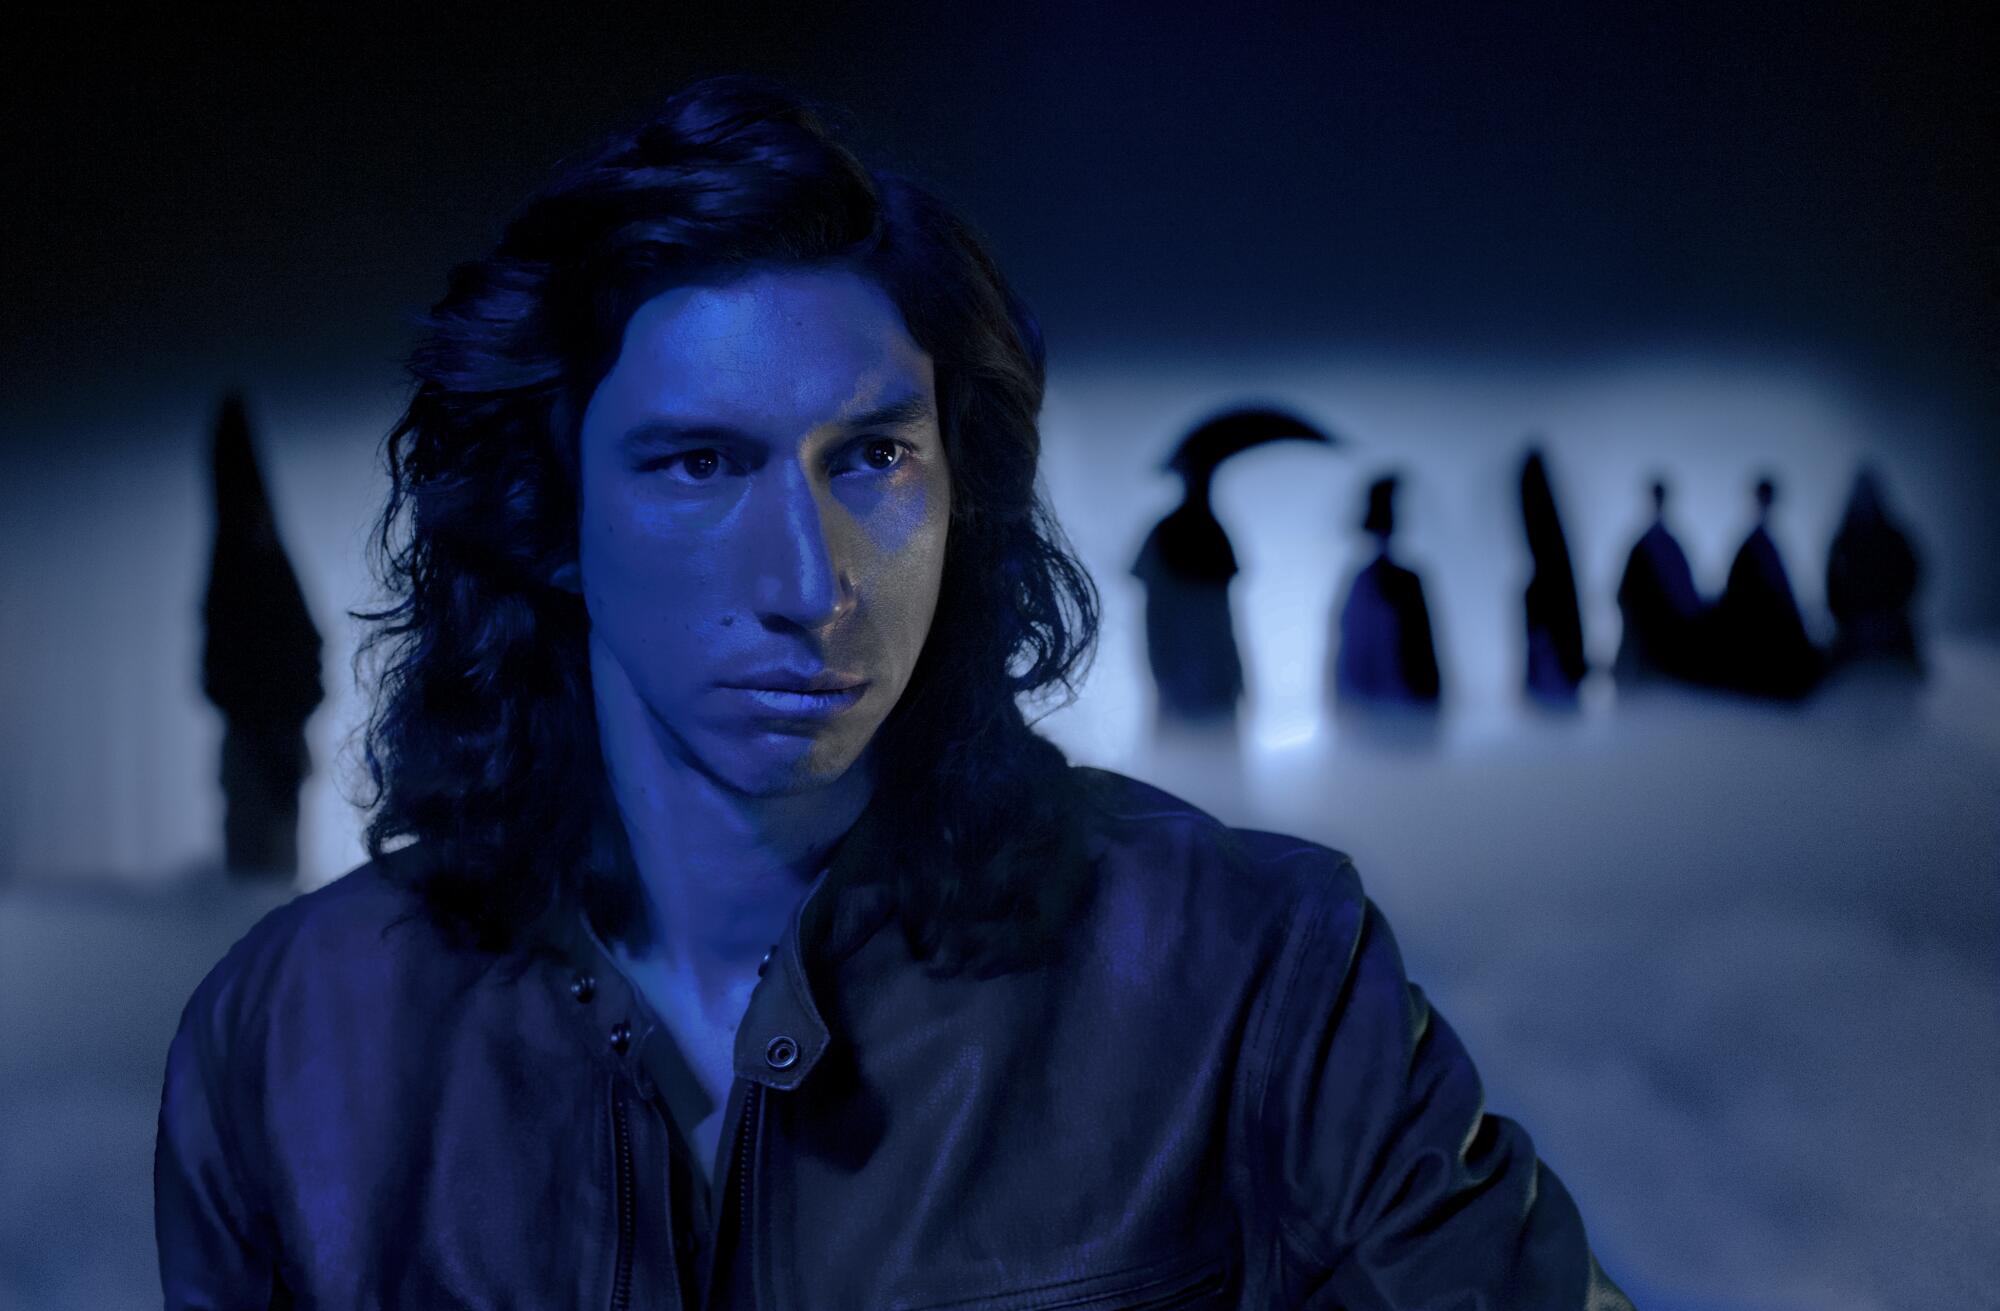 Adam Driver, his face lit blue, with shadowy figures behind him, in the movie "Annette."